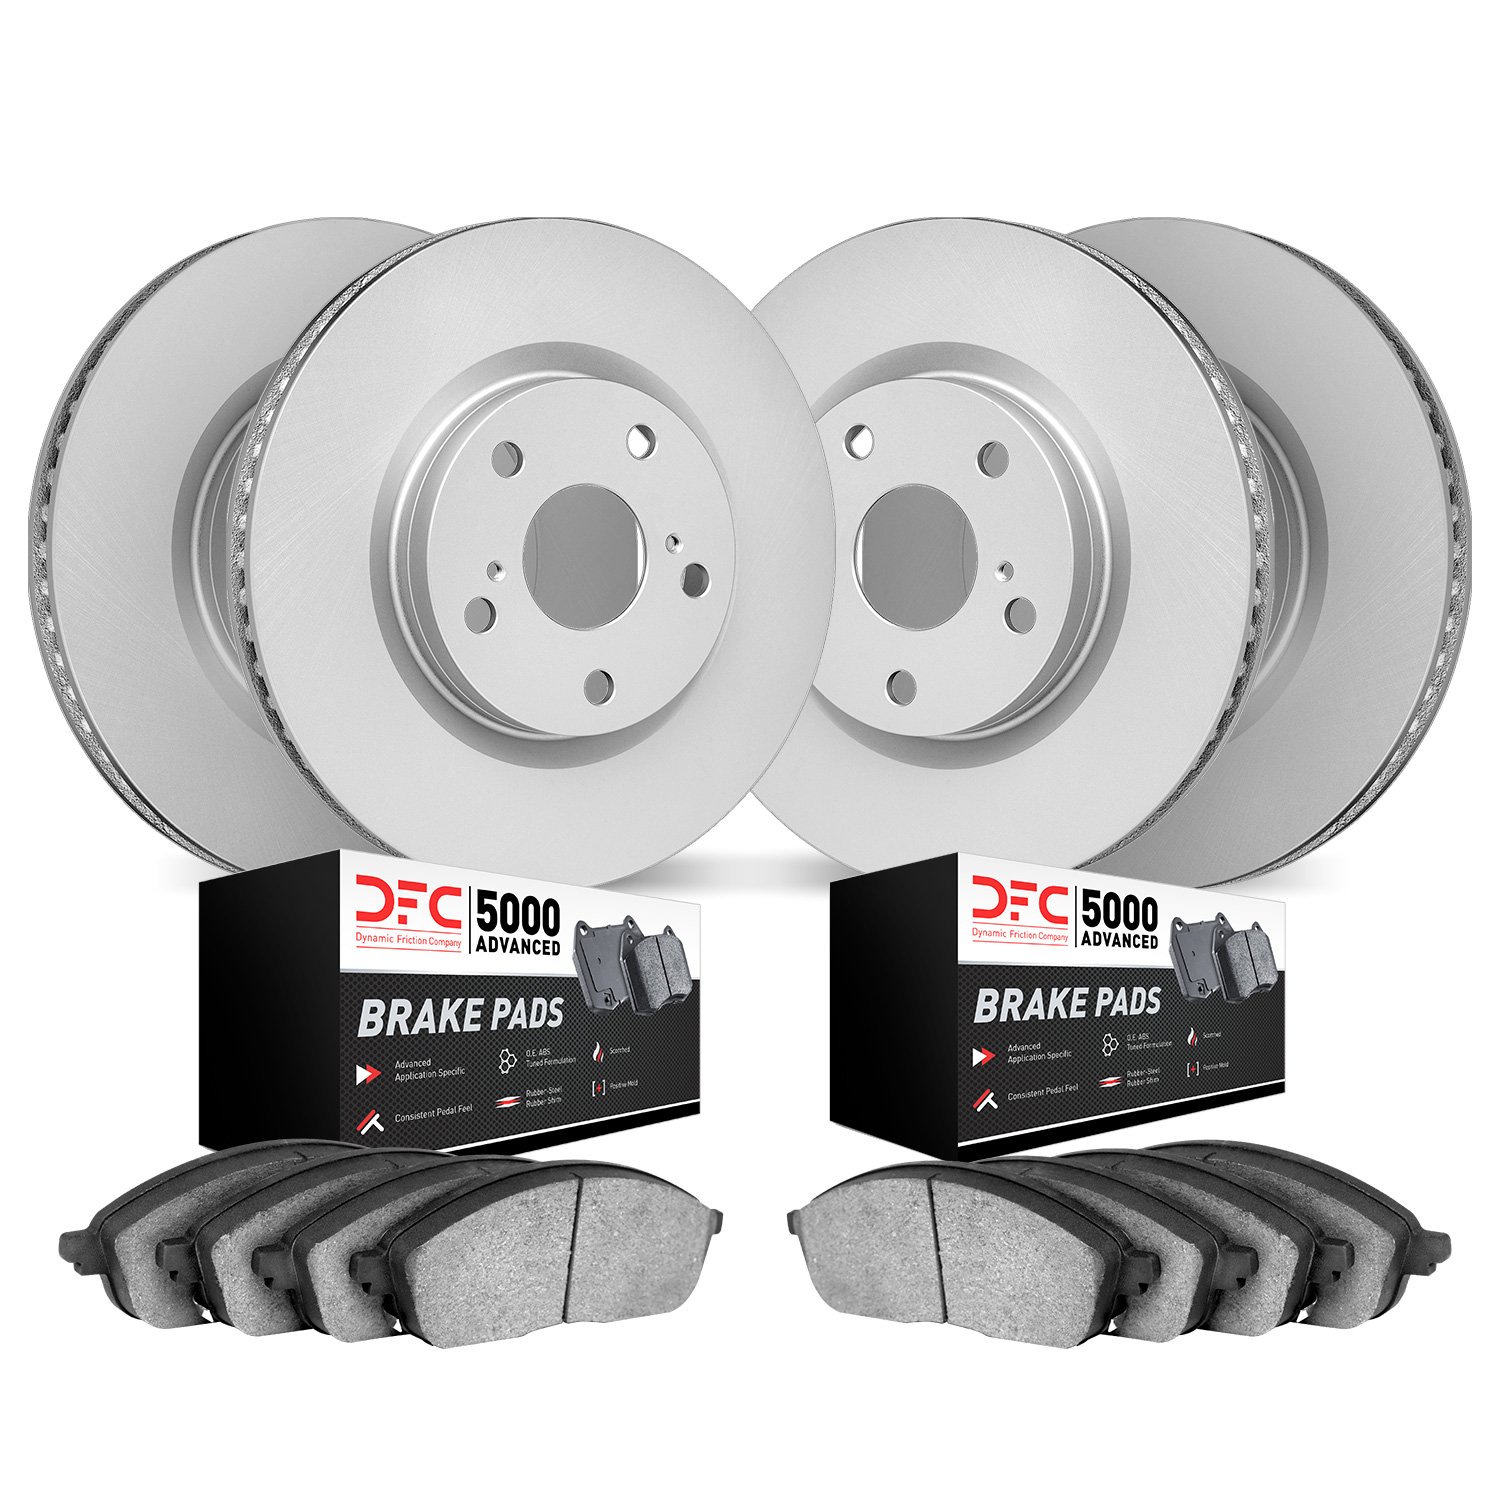 4504-46041 Geospec Brake Rotors w/5000 Advanced Brake Pads Kit, 2005-2008 GM, Position: Front and Rear